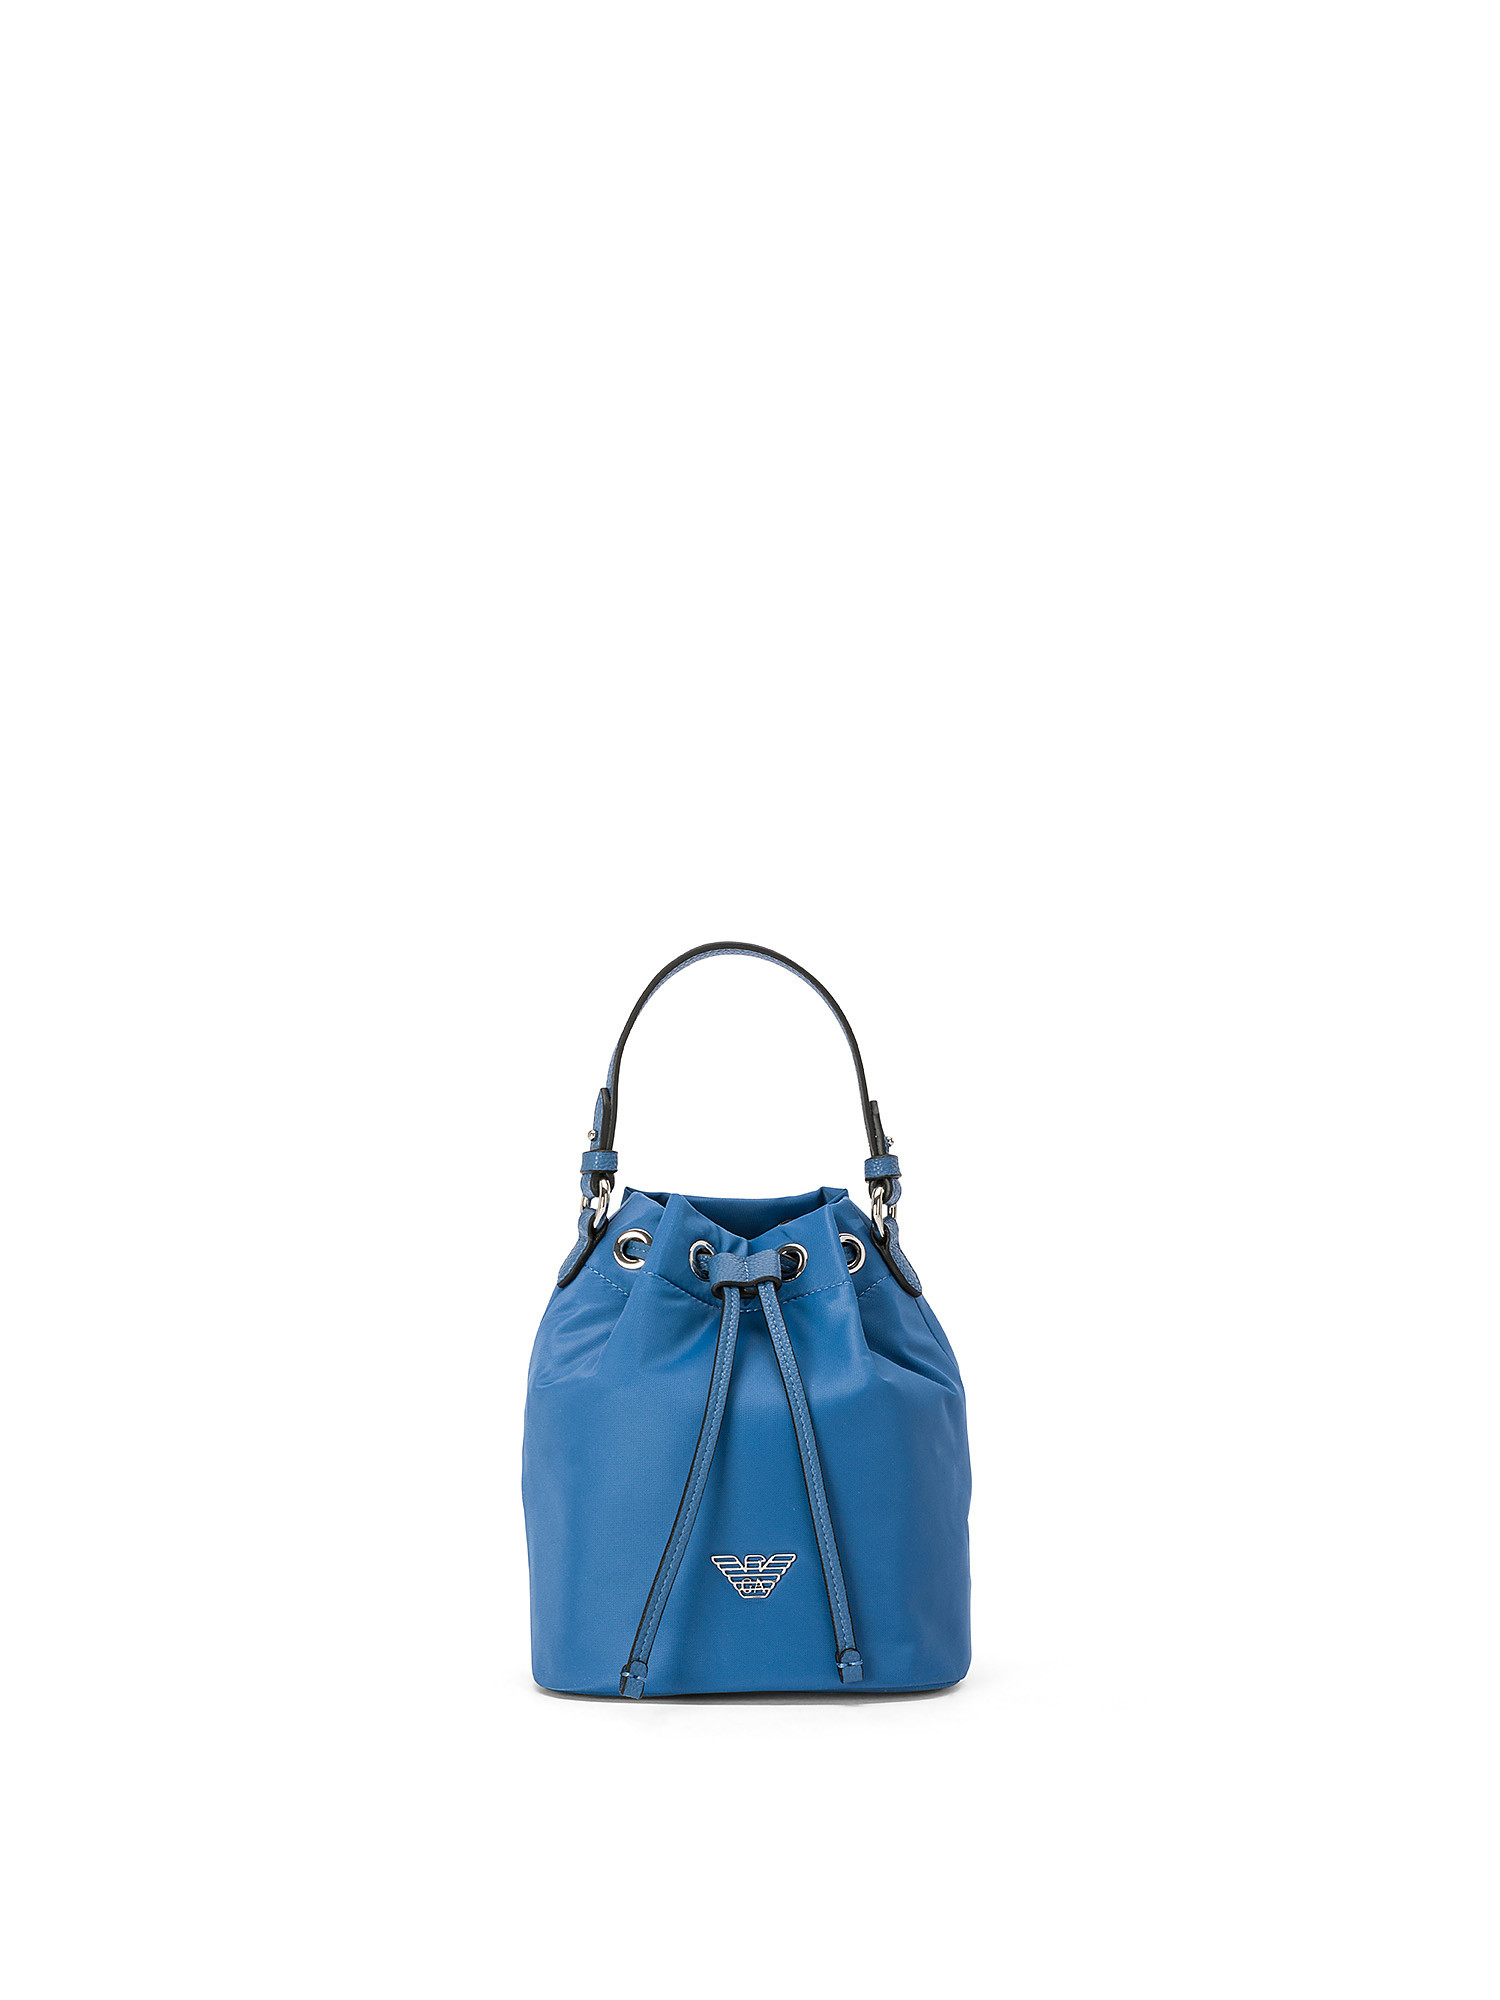 Emporio Armani - Bucket bag in recycled nylon, Light Blue, large image number 0